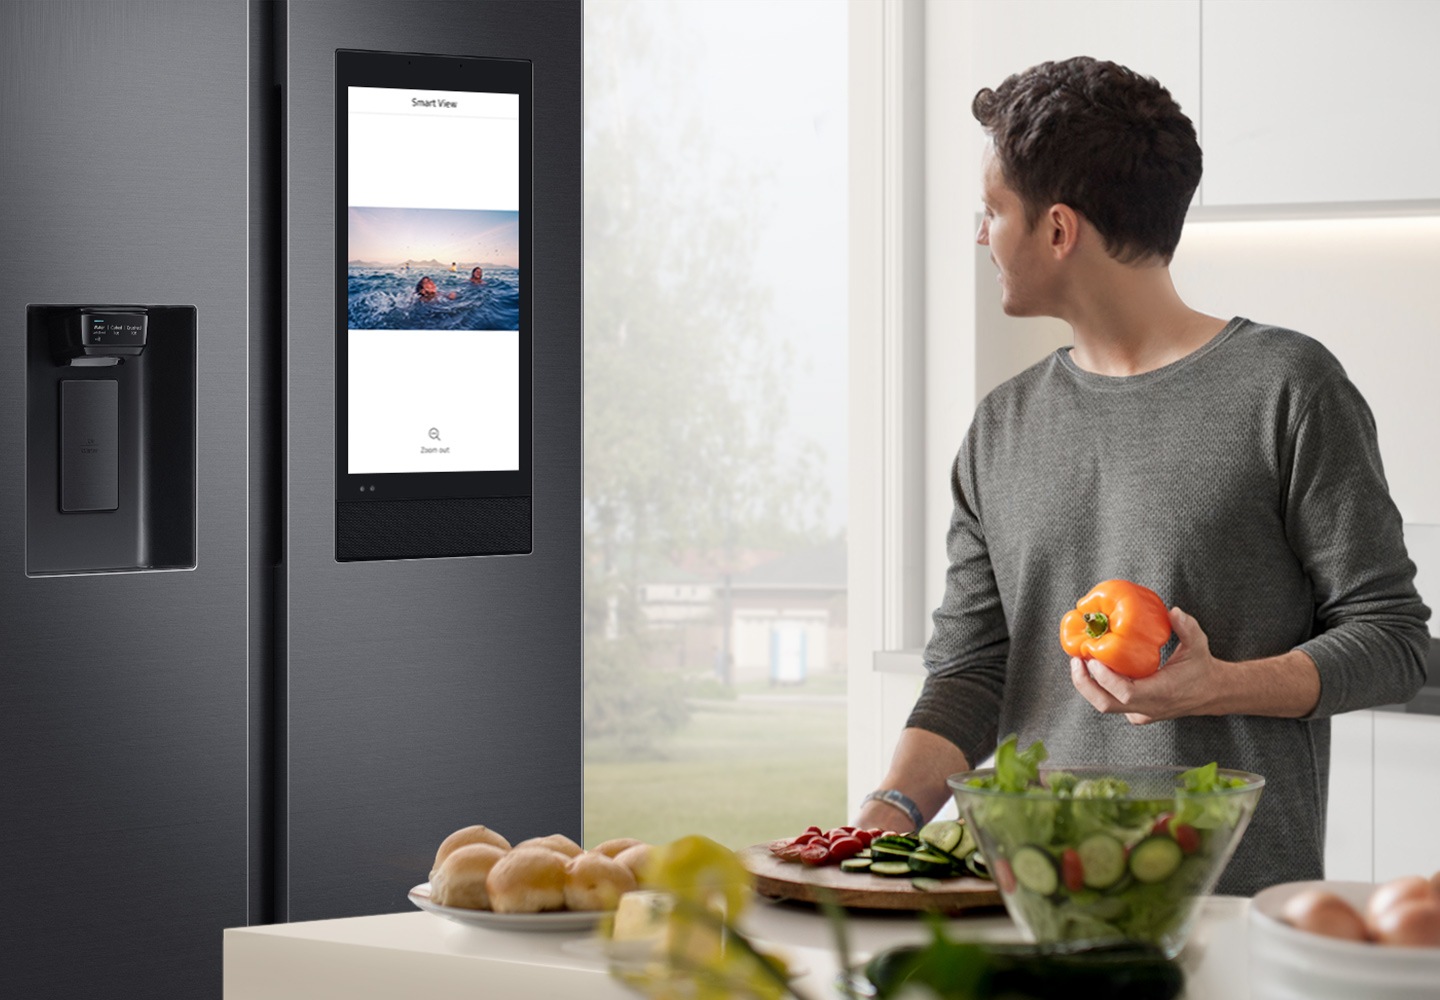 Mirror your smartphone or TV, right on your fridge